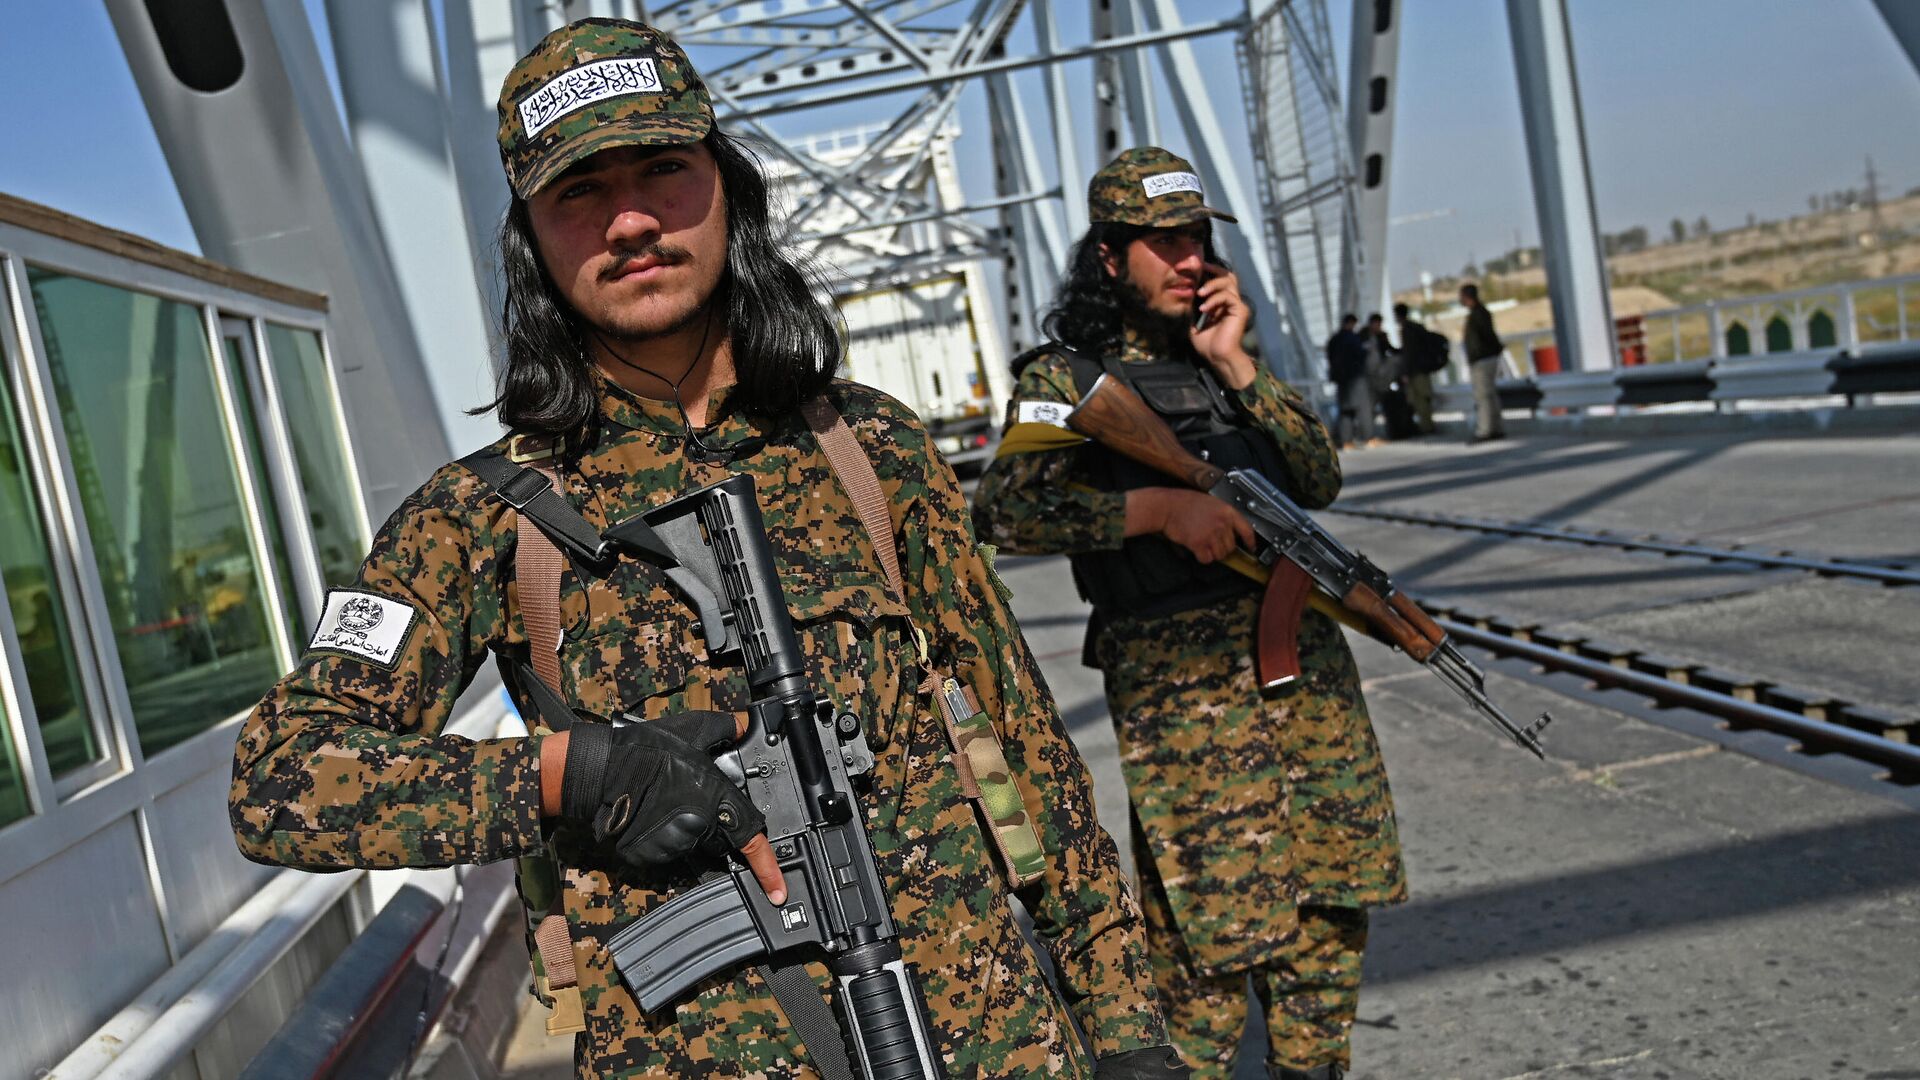 This picture taken on October 27, 2021 shows Taliban border security guards standing at the Afghanistan-Uzbekistan Friendship Bridge in Hairatan, about 82 kms north of Mazar-i-Sharif - Sputnik International, 1920, 08.02.2022